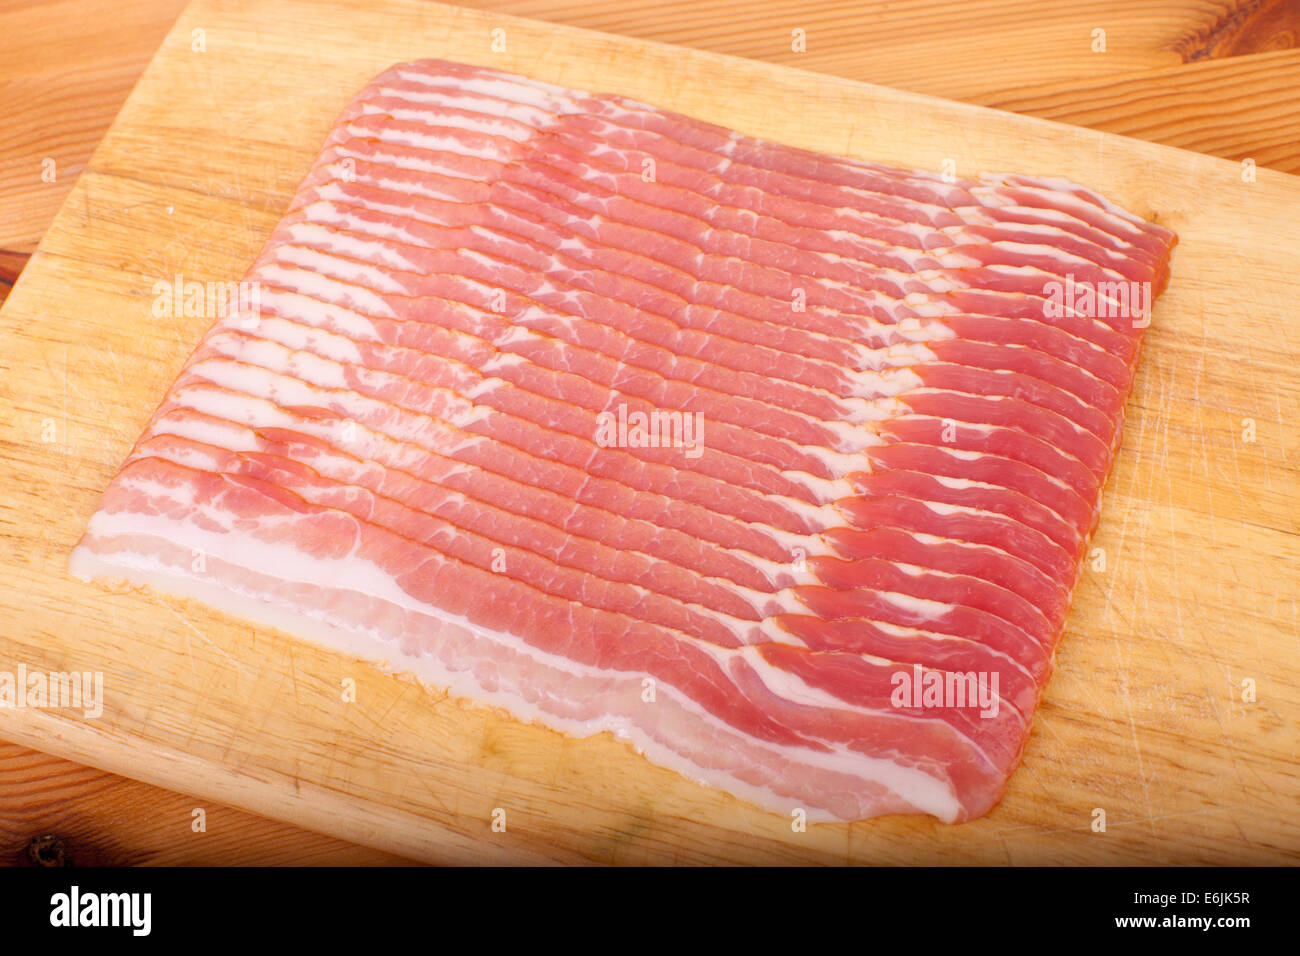 streaky bacon on the wooden chopping board Stock Photo